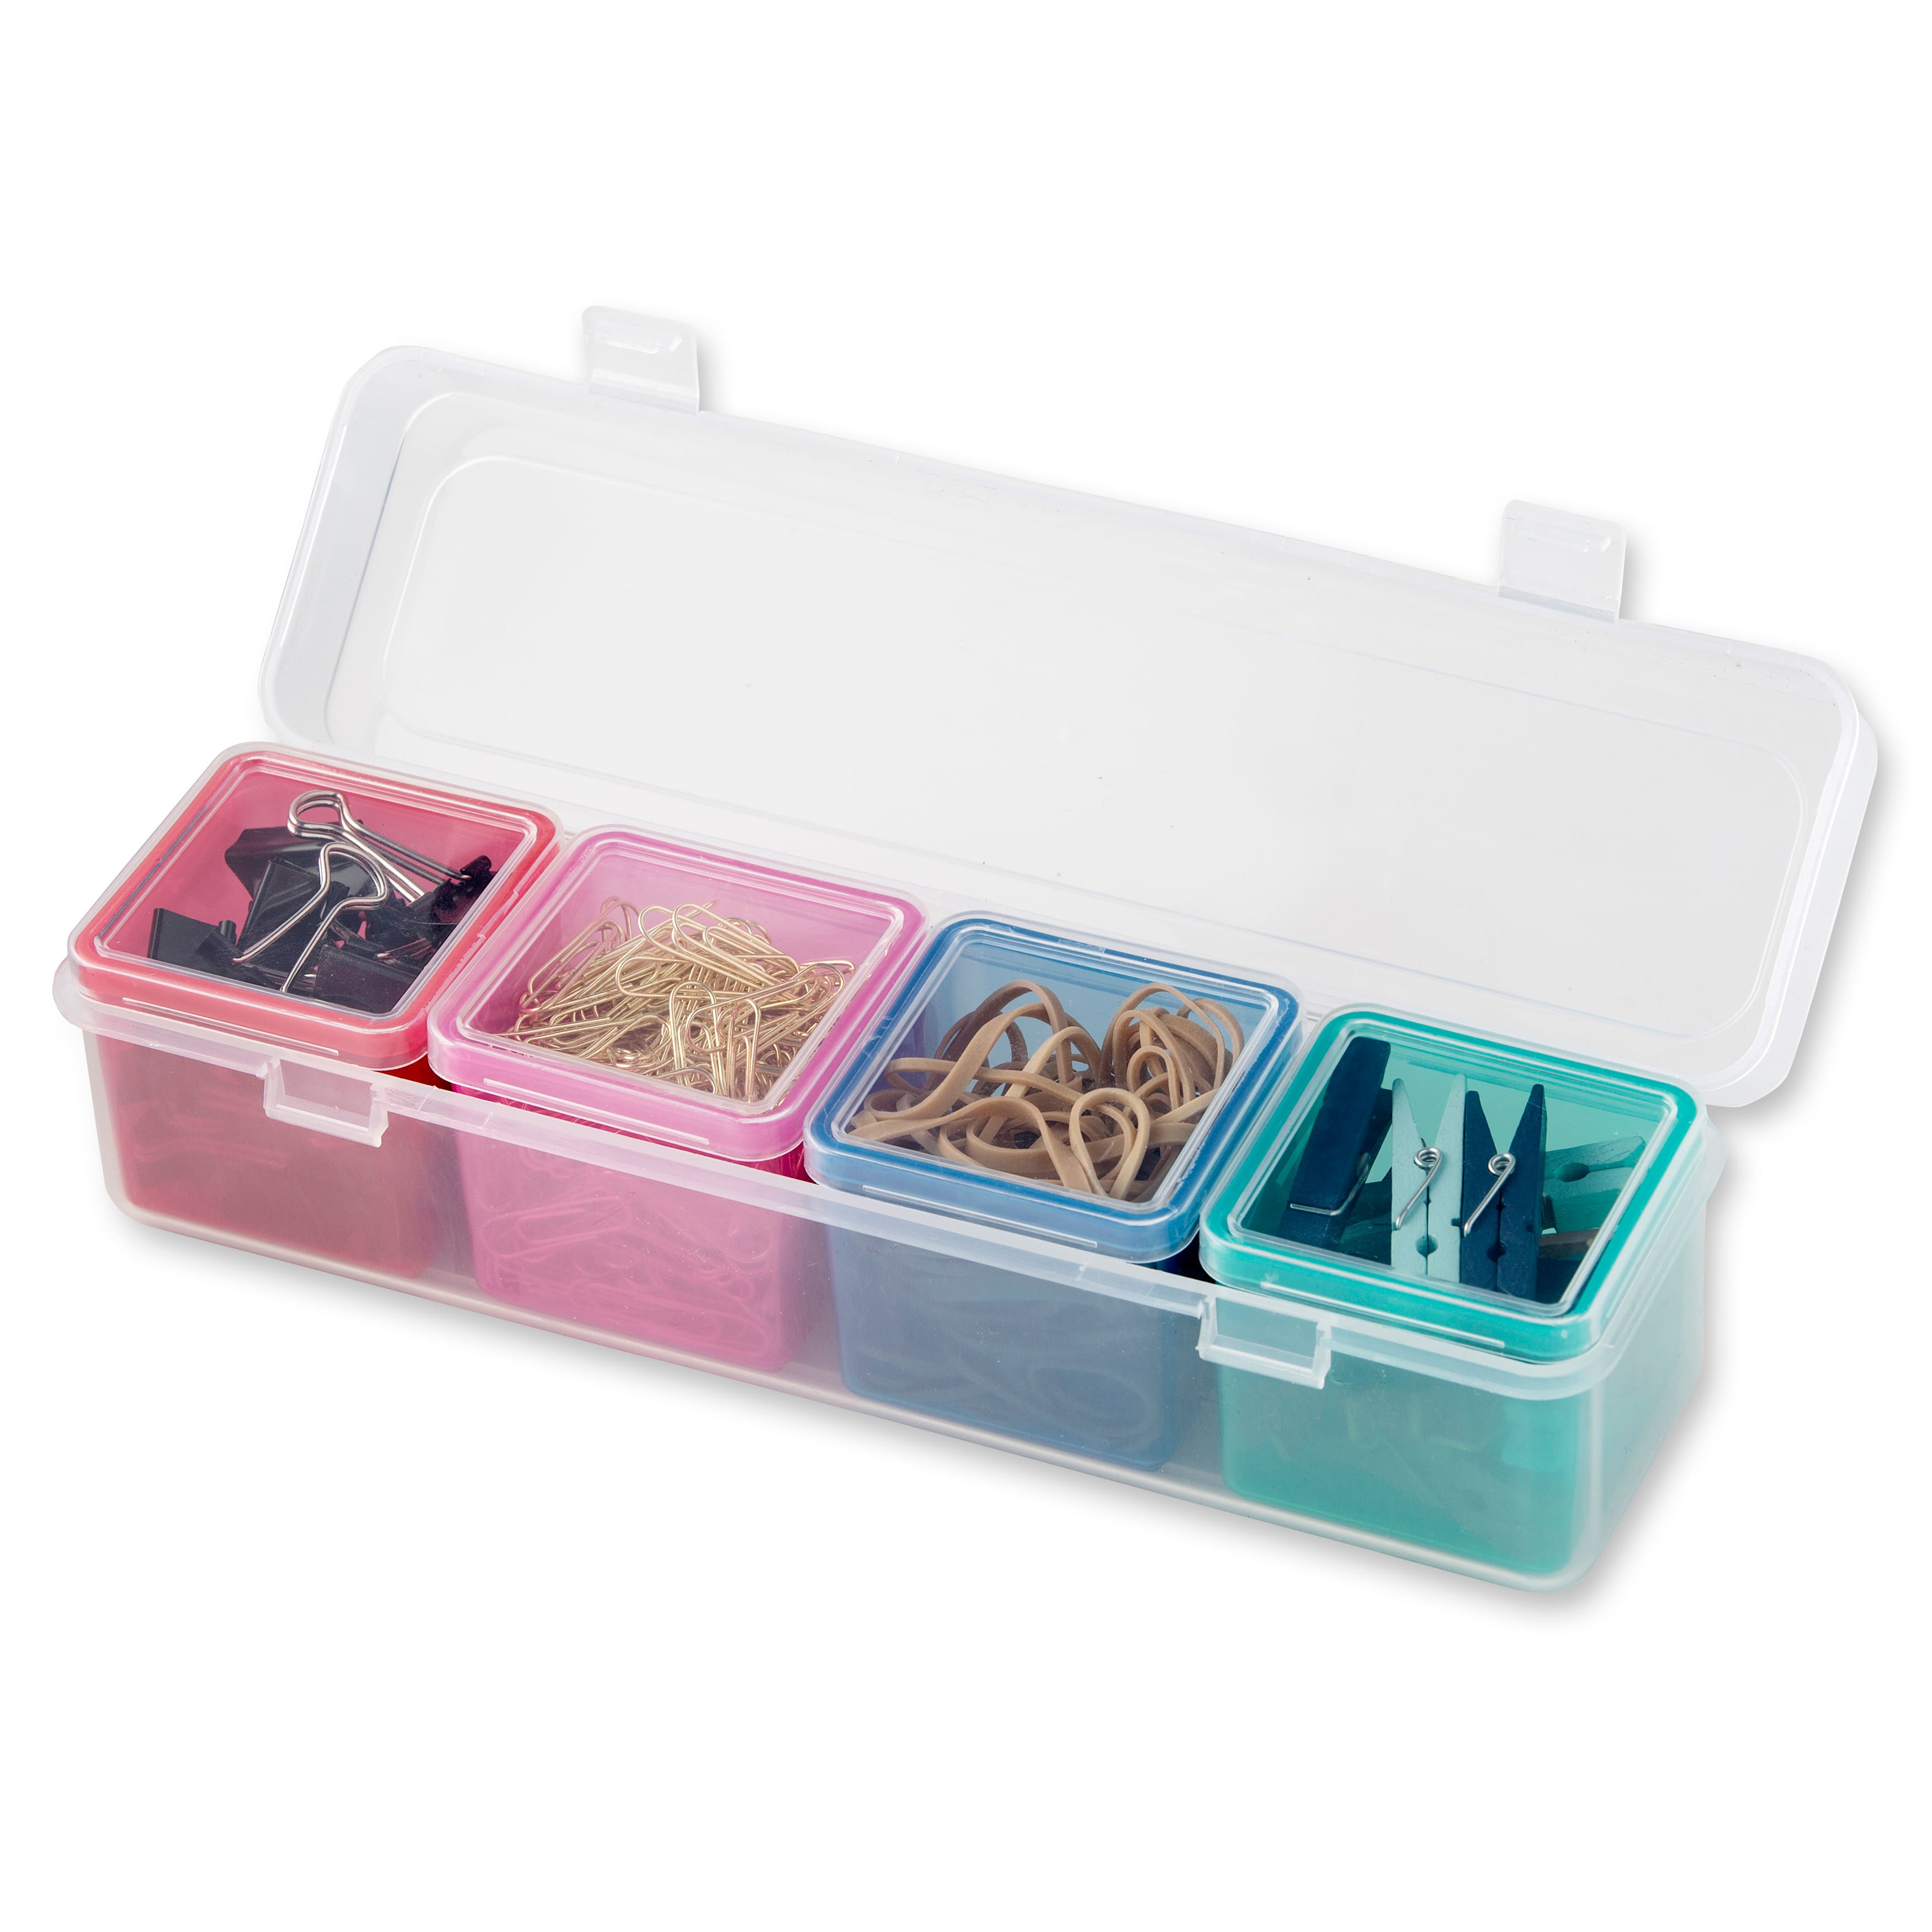 5 Five Simply Smart Storage Box With Wooden Lid 1 L -  –  Online shop of Super chain stores